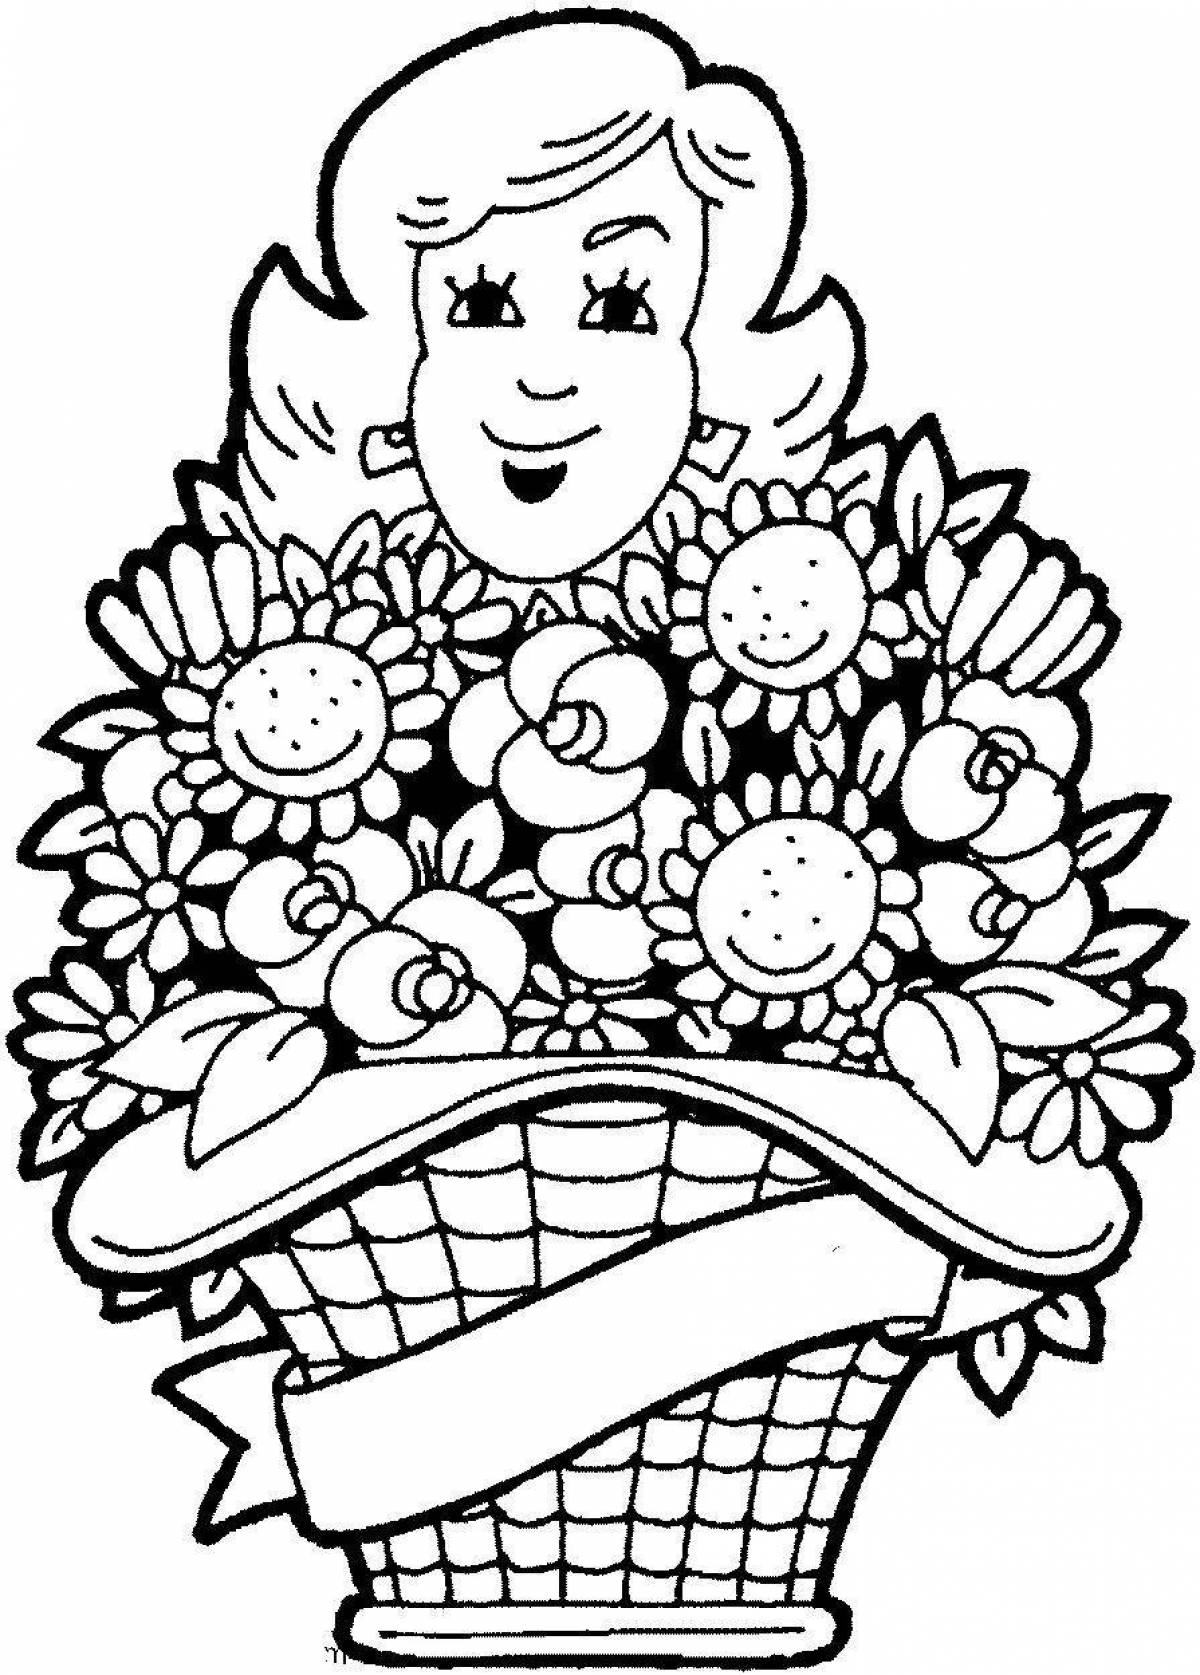 Exuberant birthday present for mom coloring book